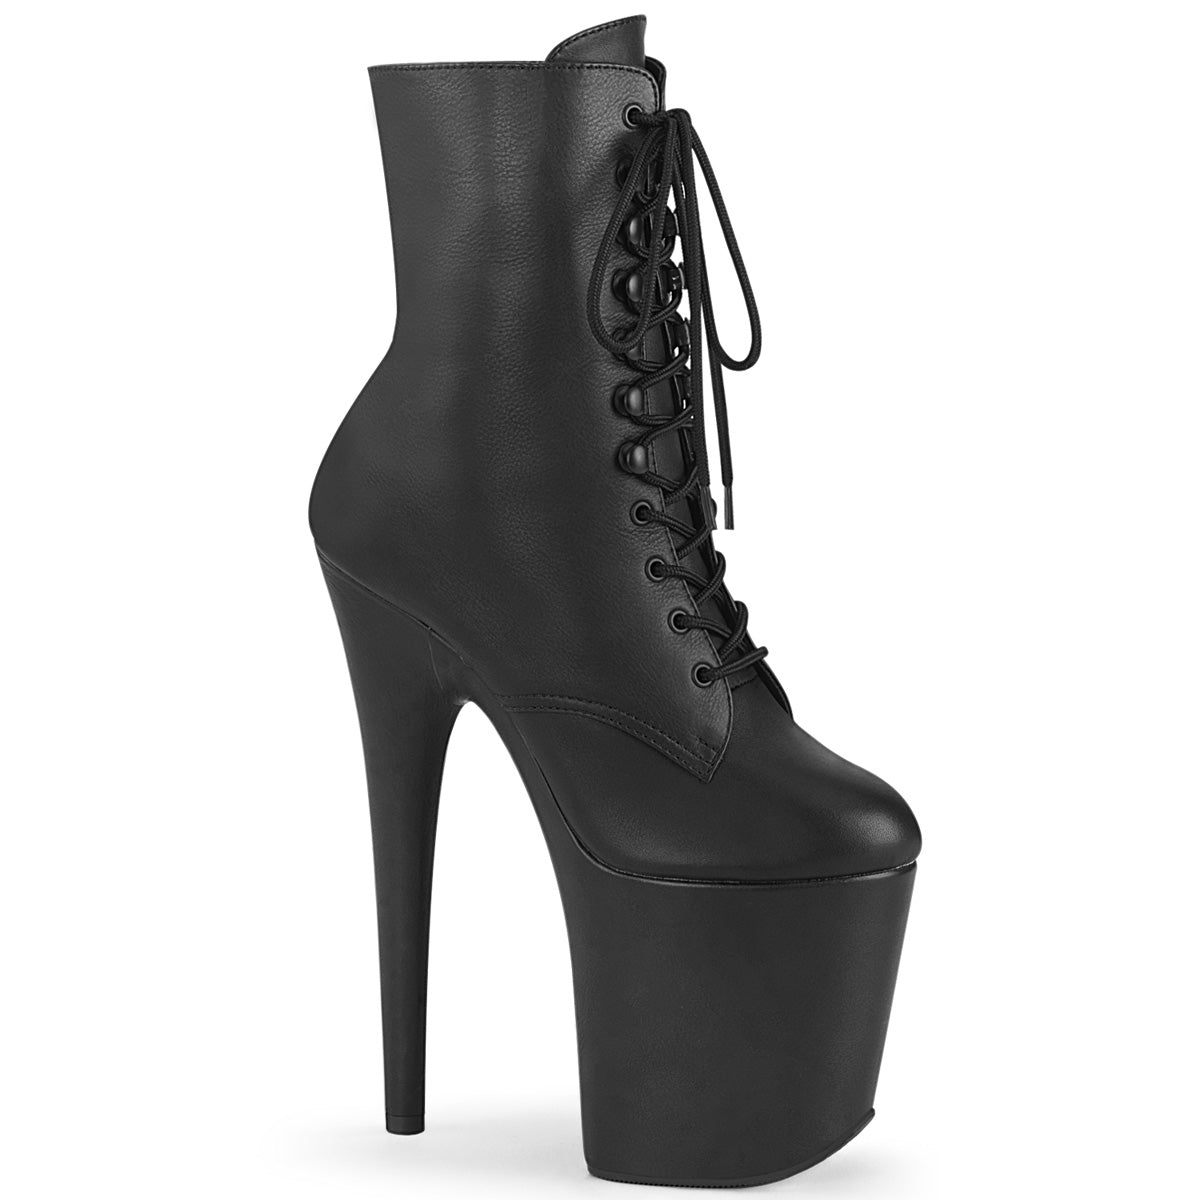 FLAMINGO-1020LWR Black Leather Ankle Boot Pleaser